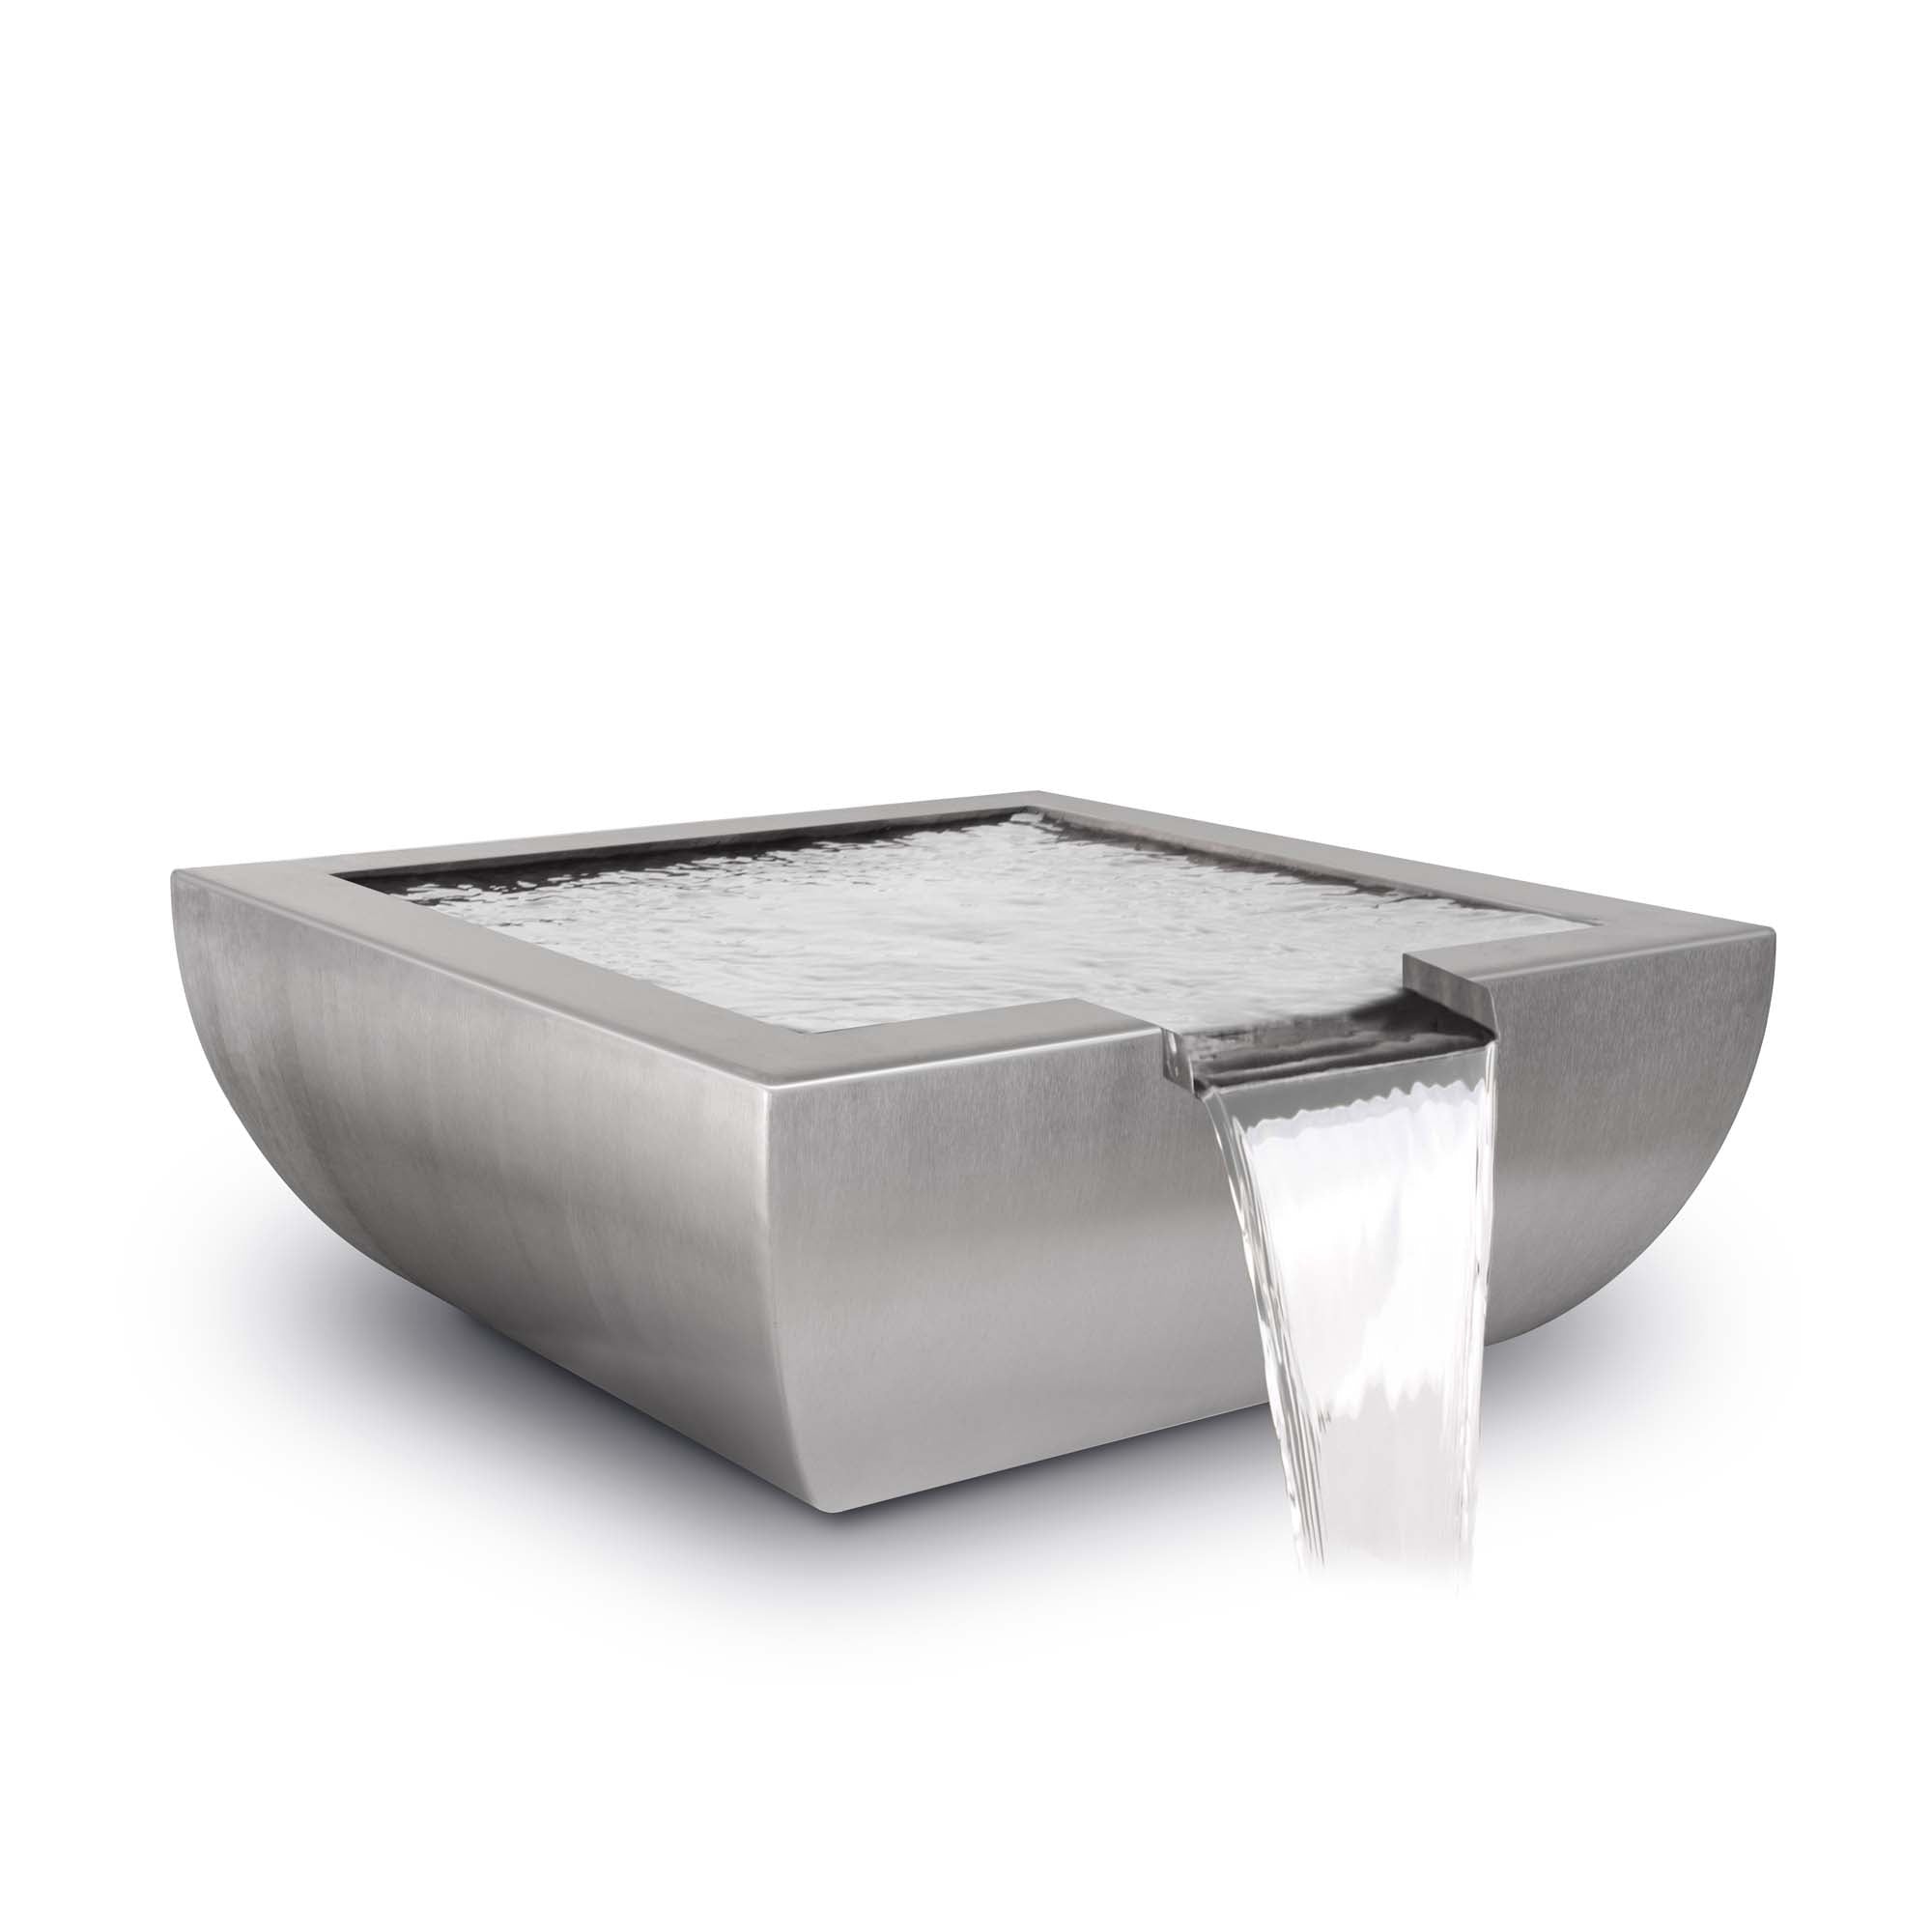 The Outdoor Plus Avalon Stainless Steel Water Bowl